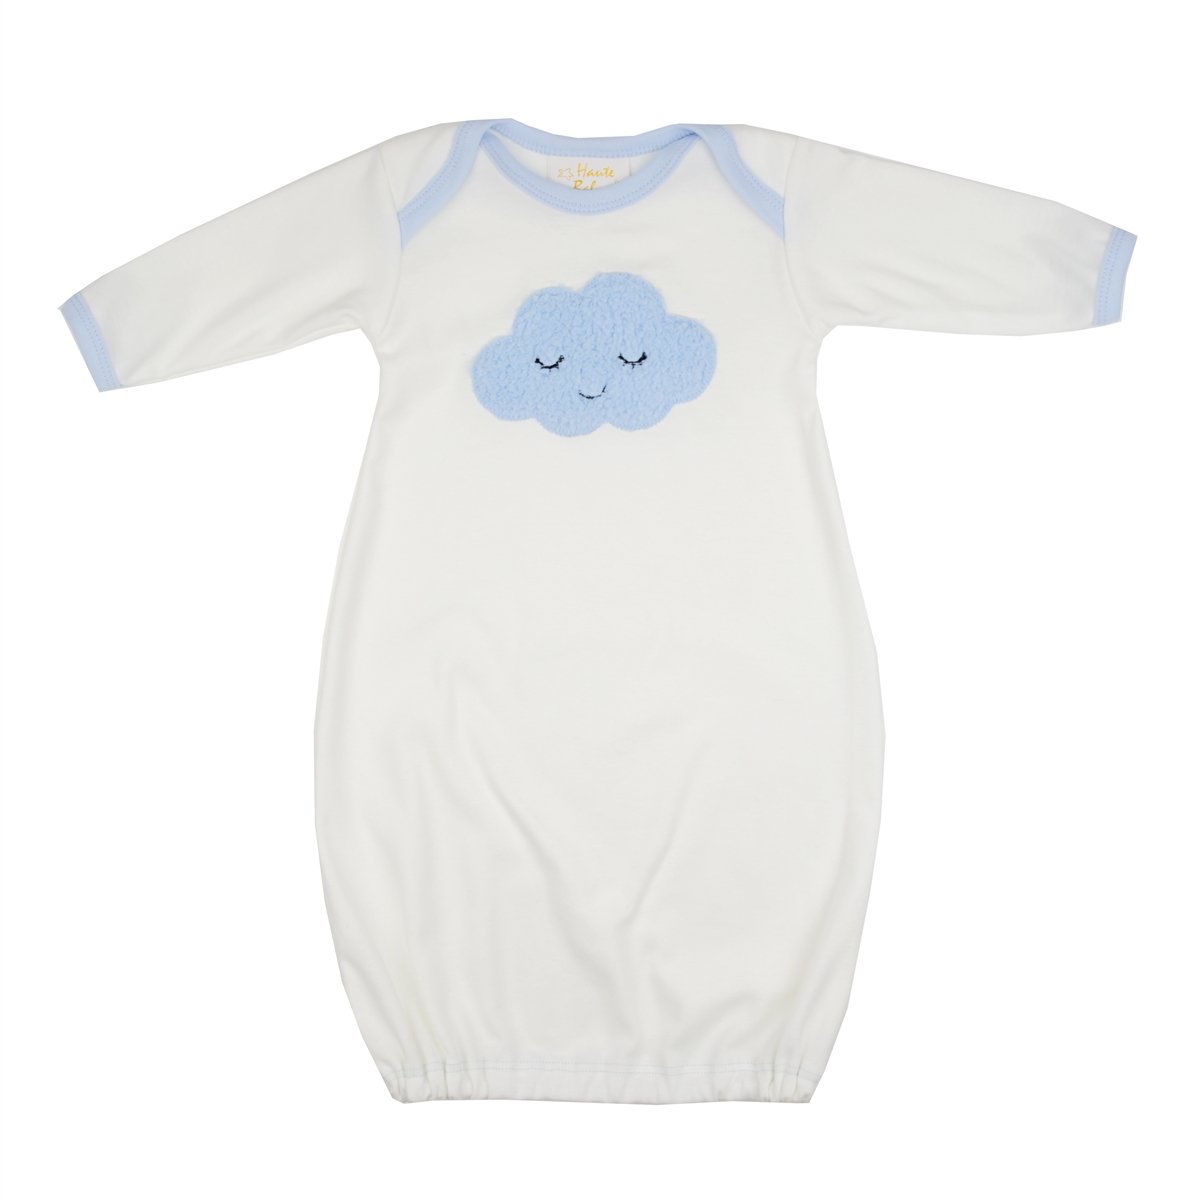 Haute Baby Sleepy Time home Gown